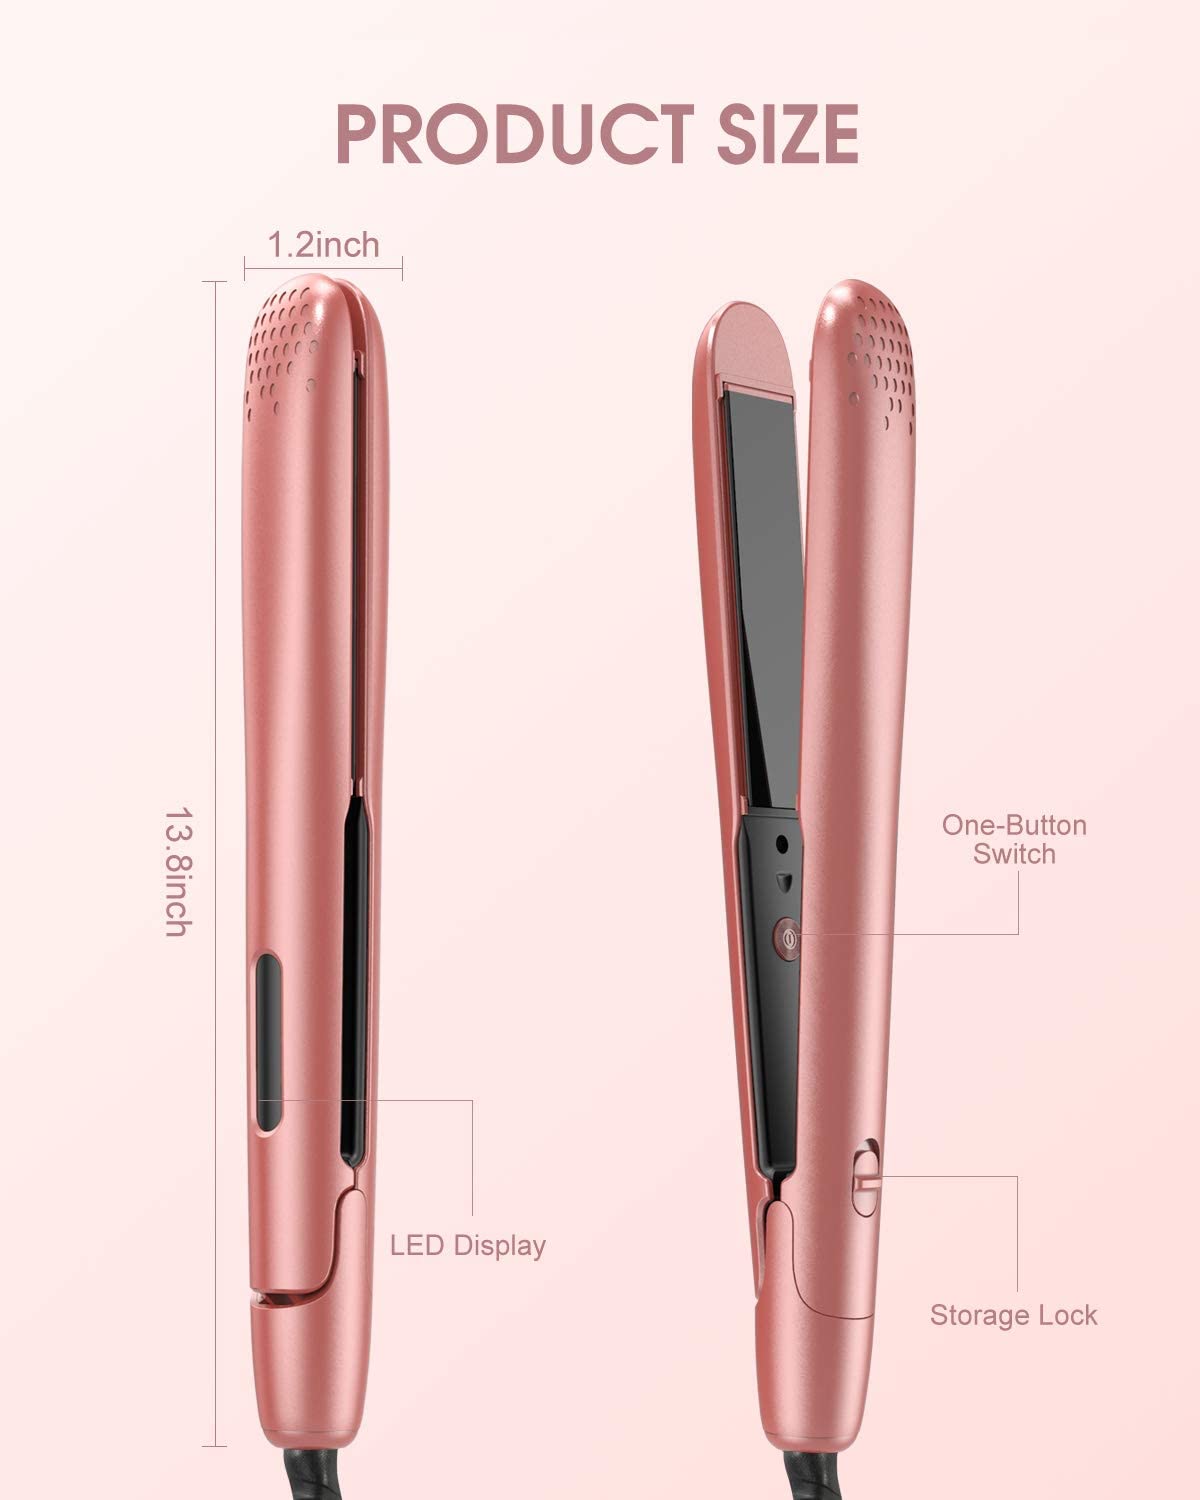 ENCHEN Dual-Use Hair Straightener Flat Iron, 2 in 1 Hairstyling Straightener and Curler, Anti-Scald 140℃~200℃ Constant Temperature 30s Fast Heating Hair Iron Straightening with Ceramic Plate